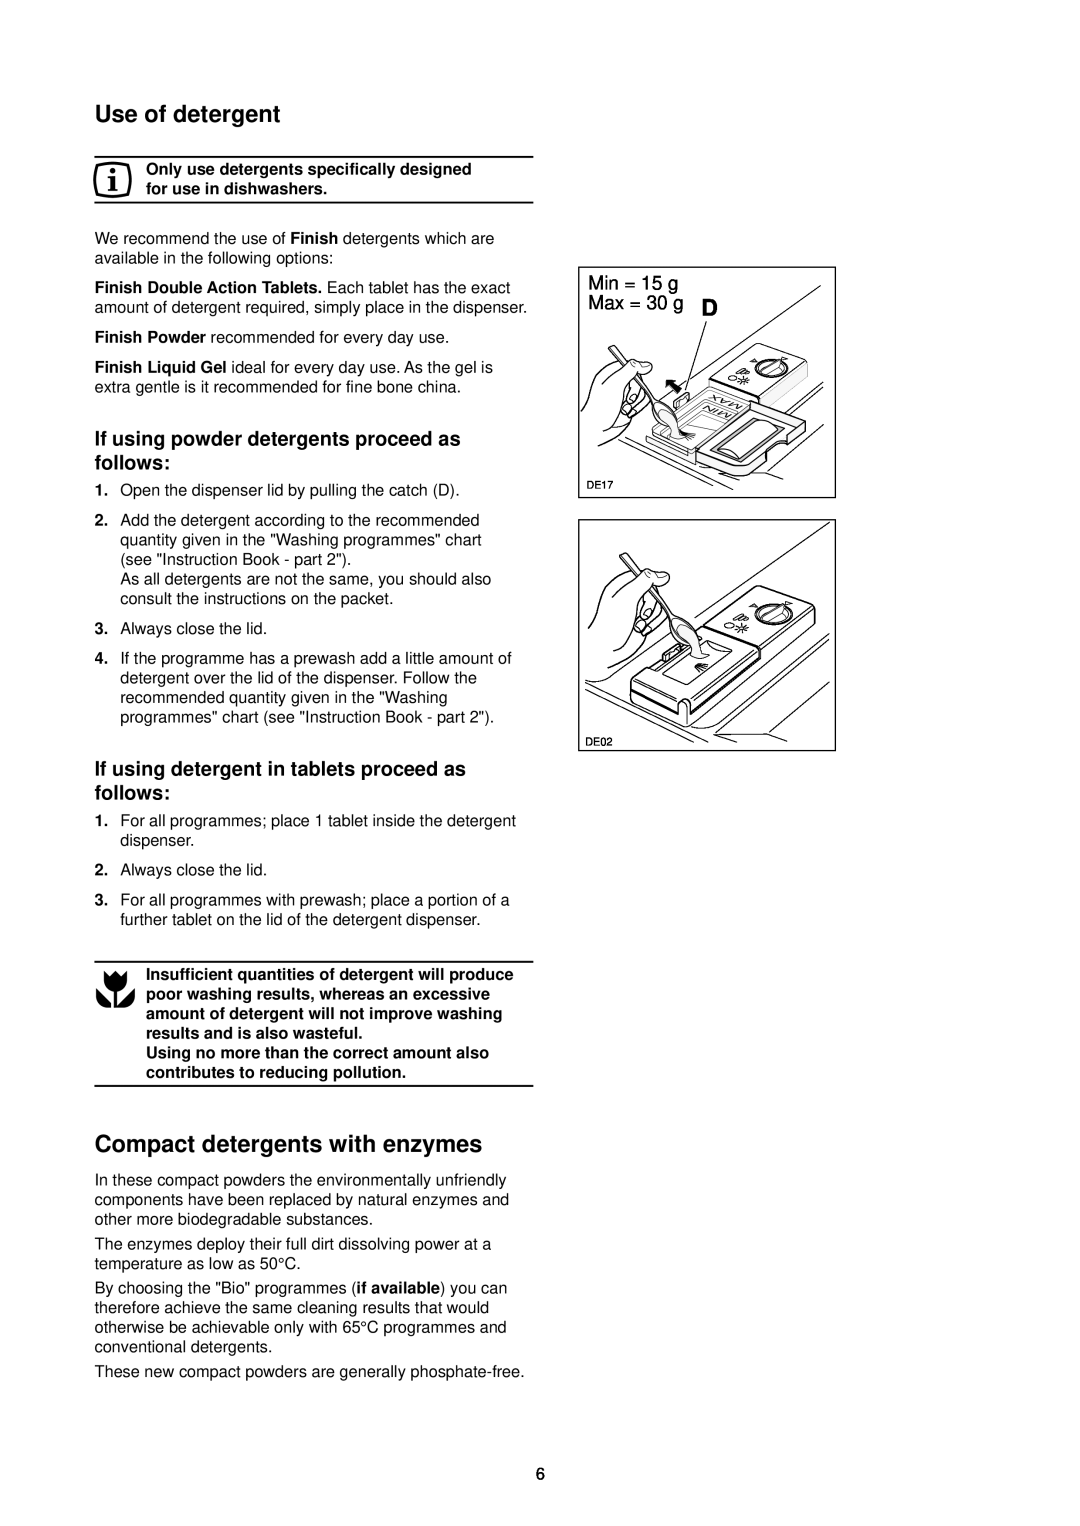 Zanussi DA 4342 manual Use of detergent, Compact detergents with enzymes, If using powder detergents proceed as follows 